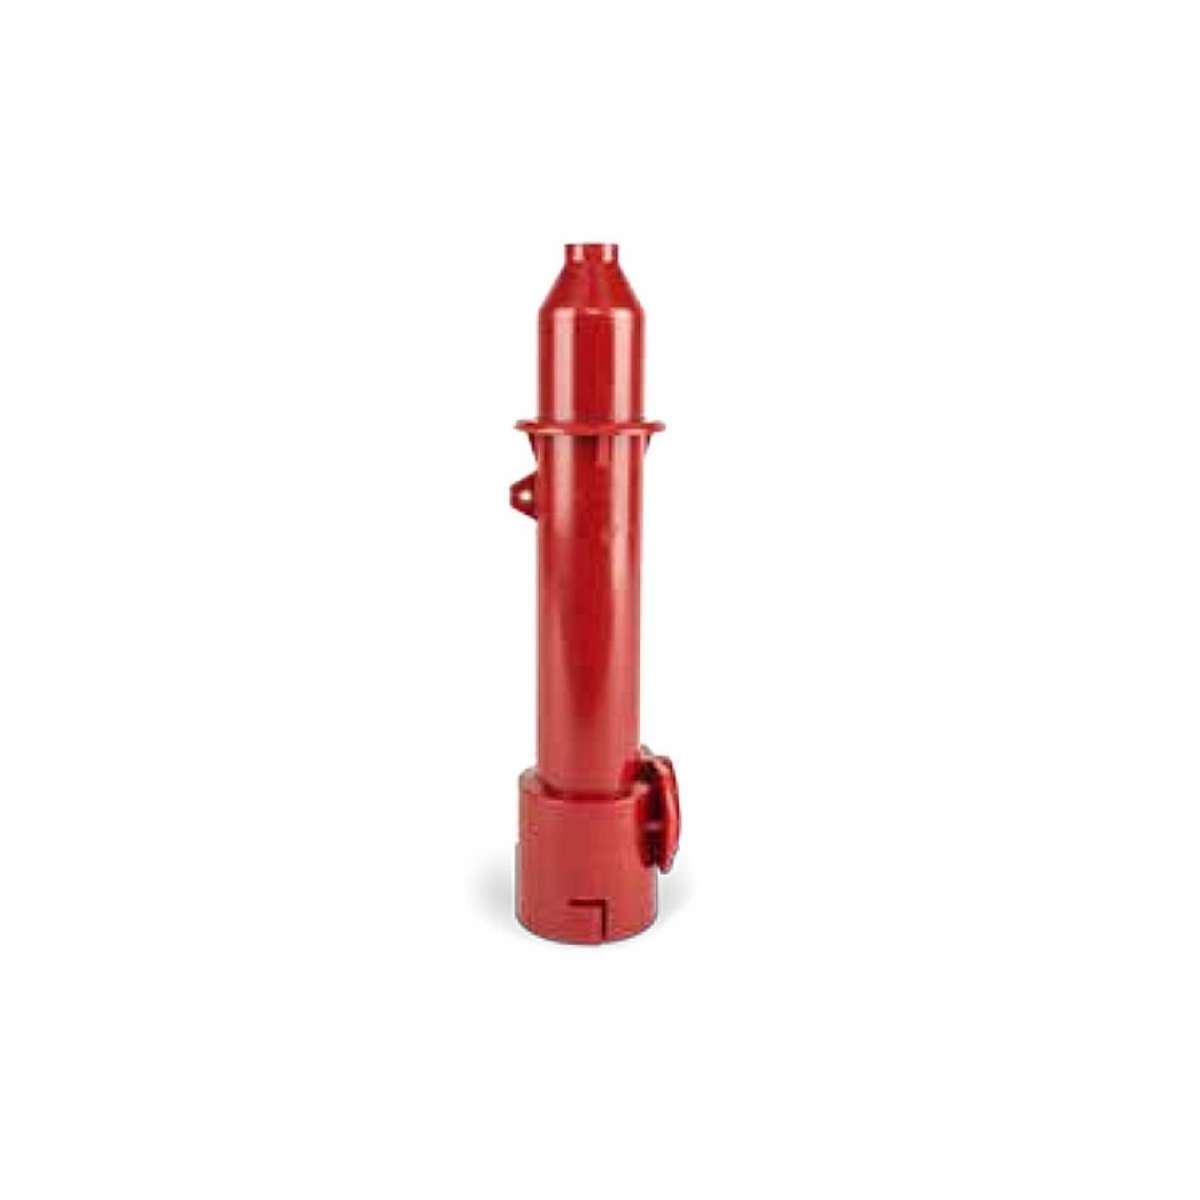 IsoLink 8" Rigid Spout with 1/2" Tip - Red